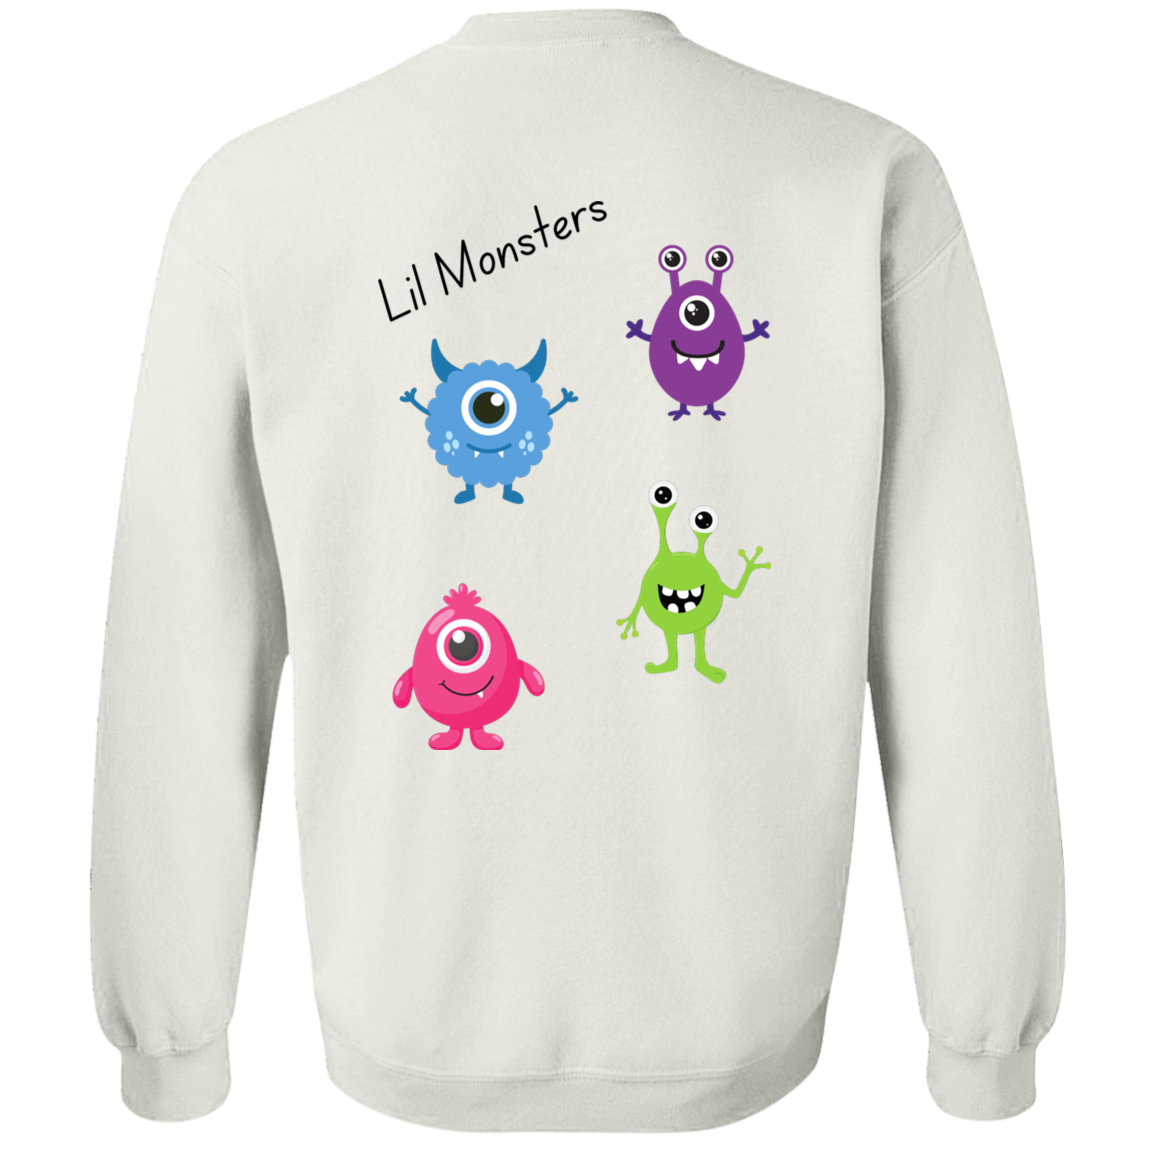 This Mama loves her Monsters Sweatshirt, Front and Back Design